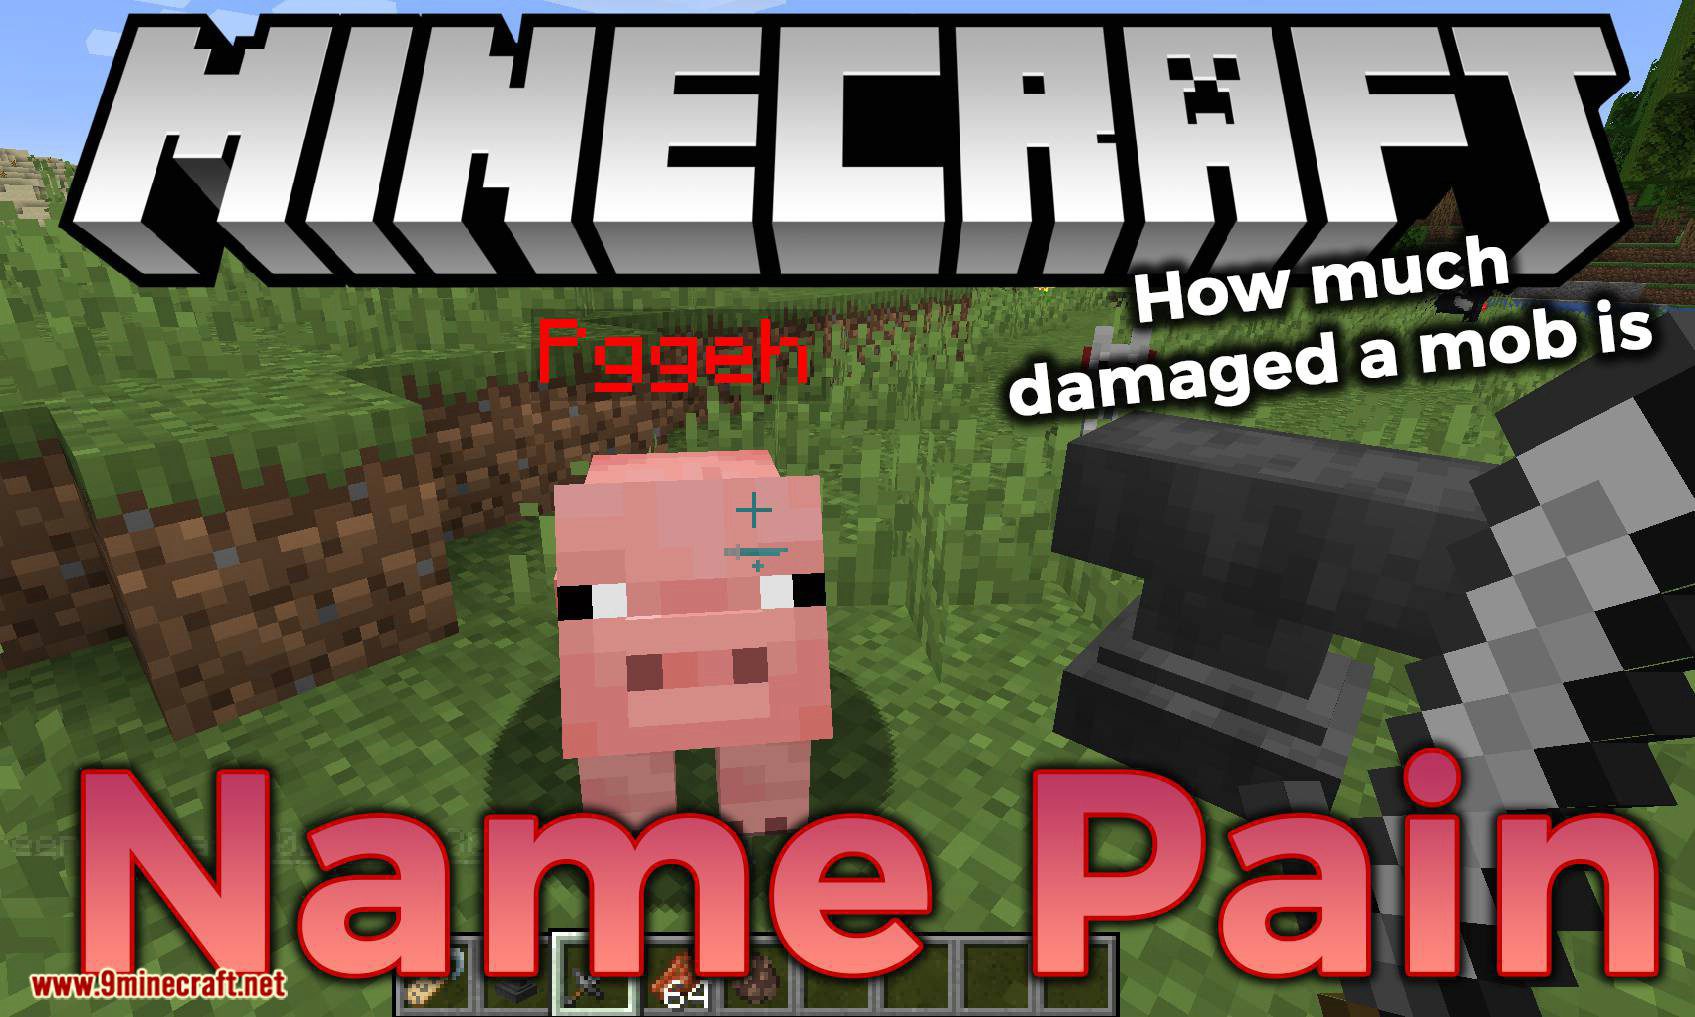 Name Pain mod for minecraft logo